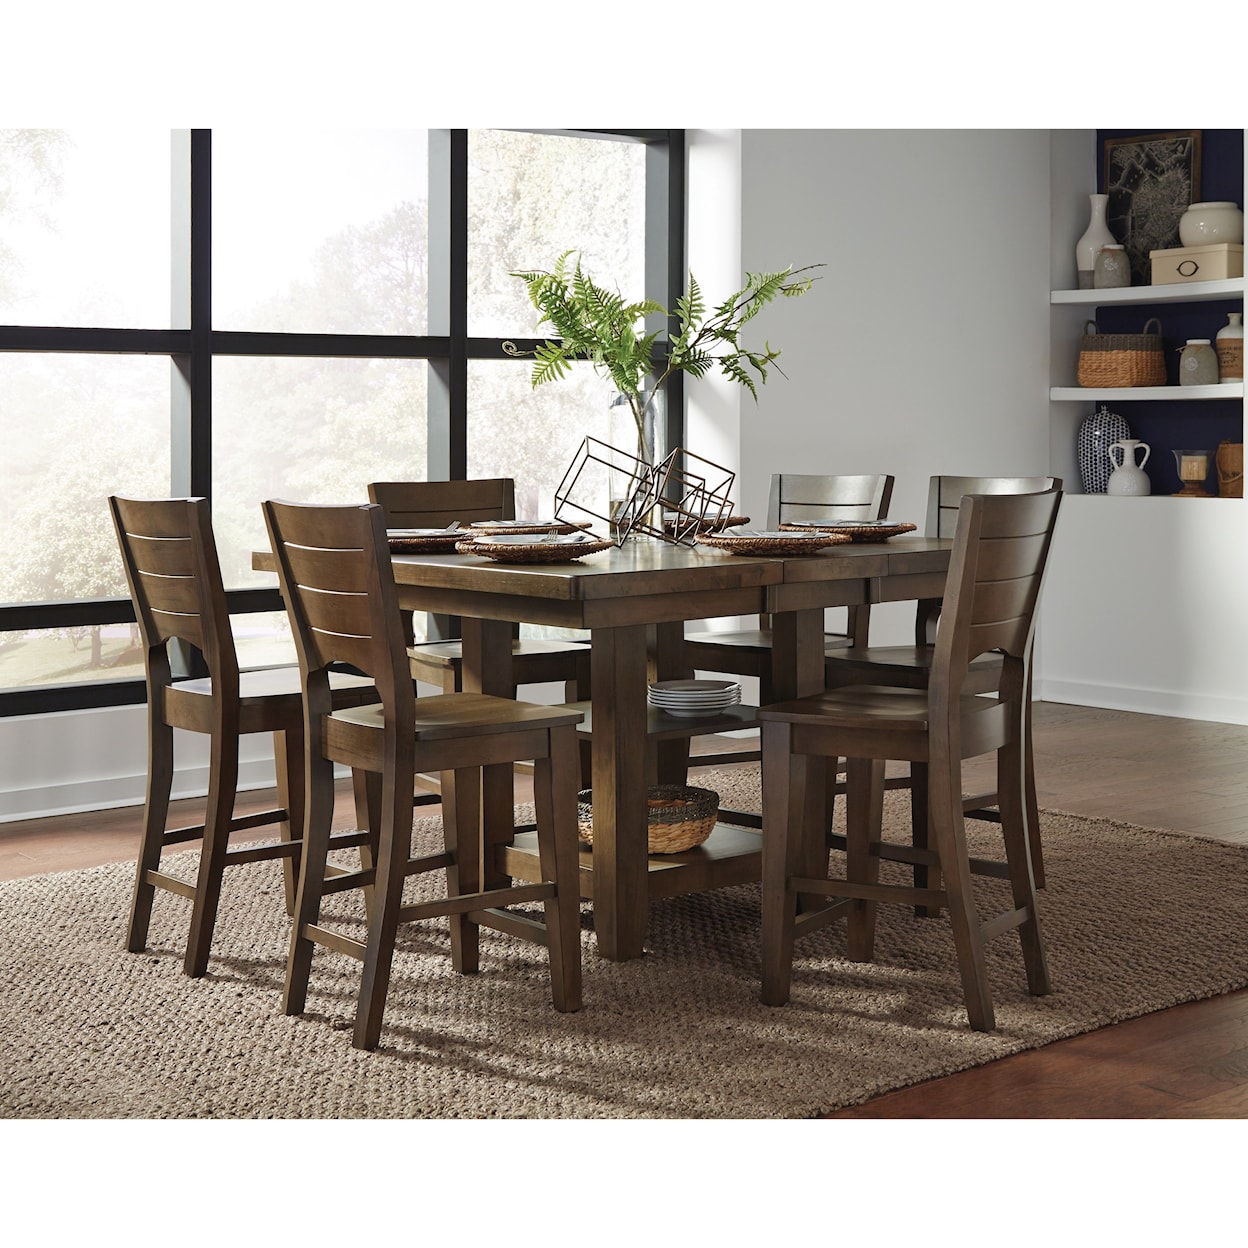 Carolina Dinette Canyon Pub Table and Chair Set